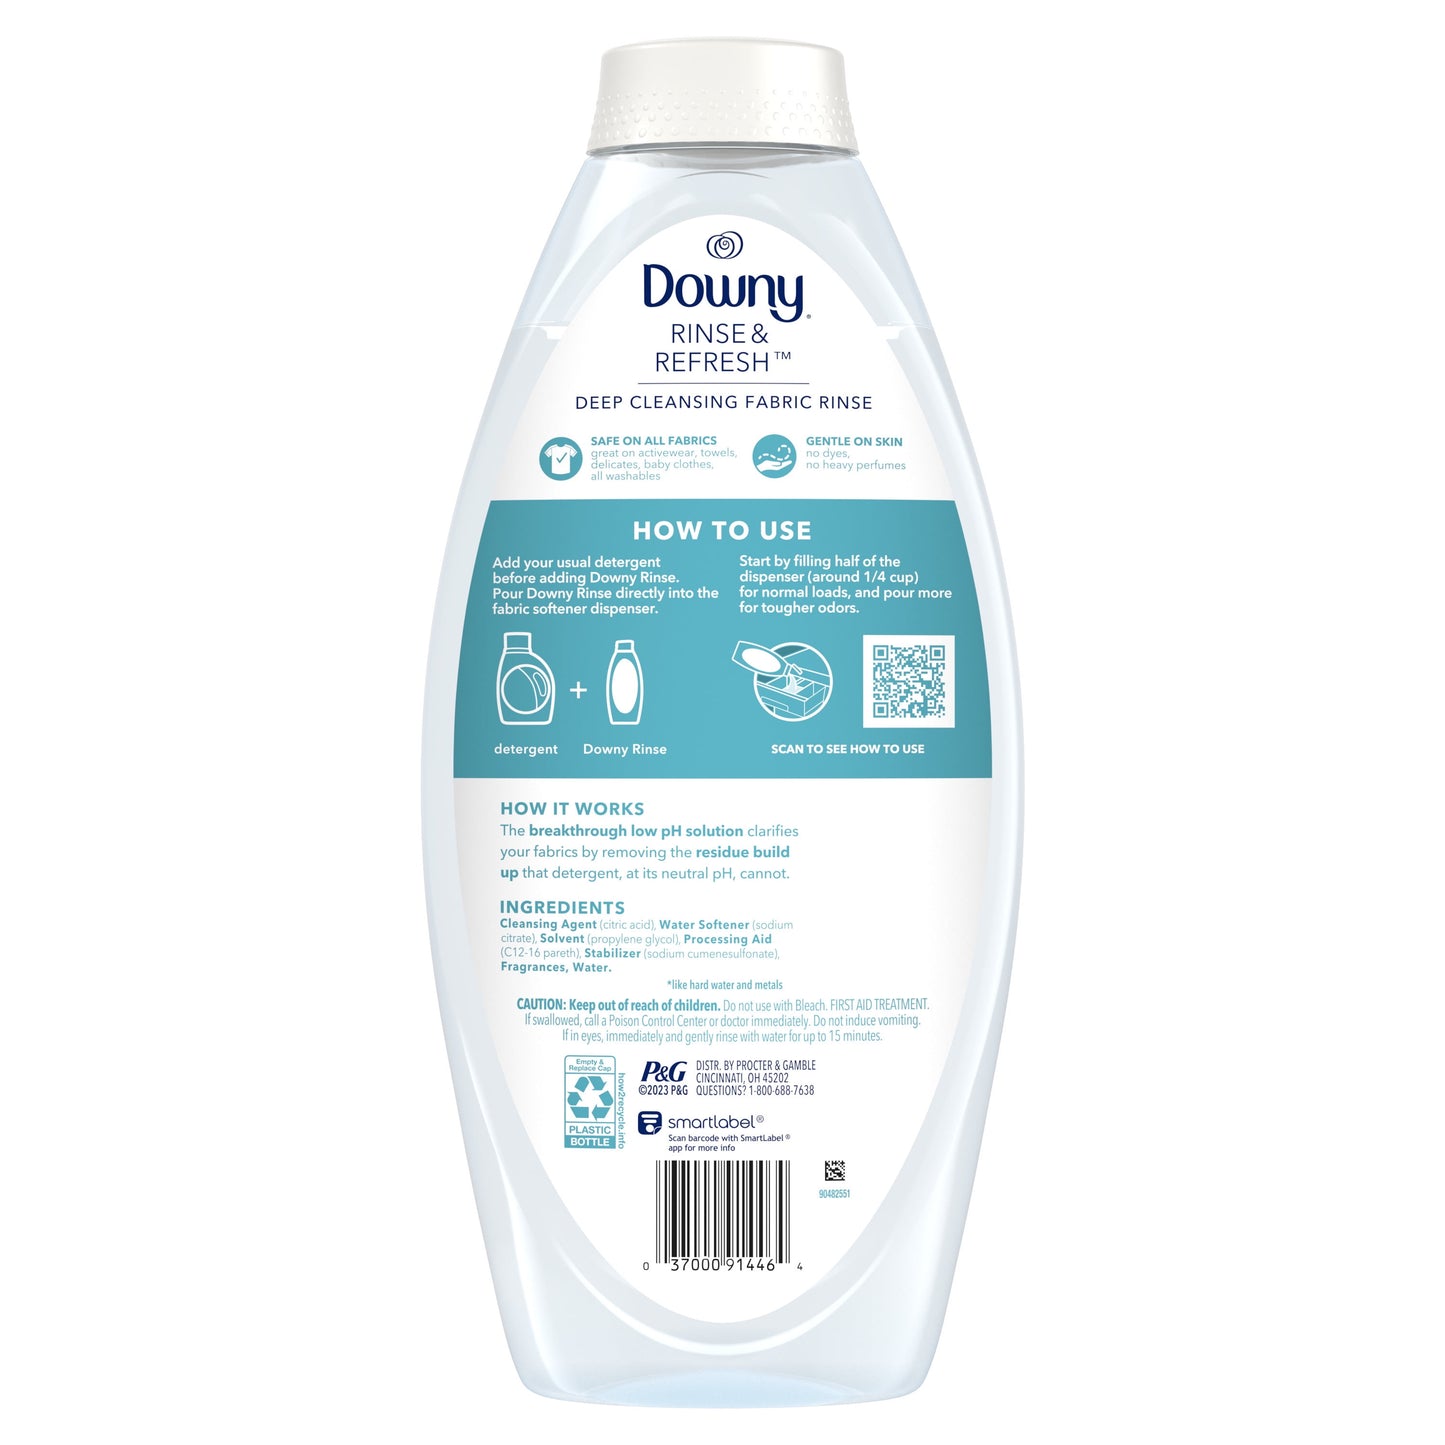 Downy Rinse & Refresh Liquid Laundry Odor Remover and Fabric Softener, Cool Cotton, 48.00 fl oz